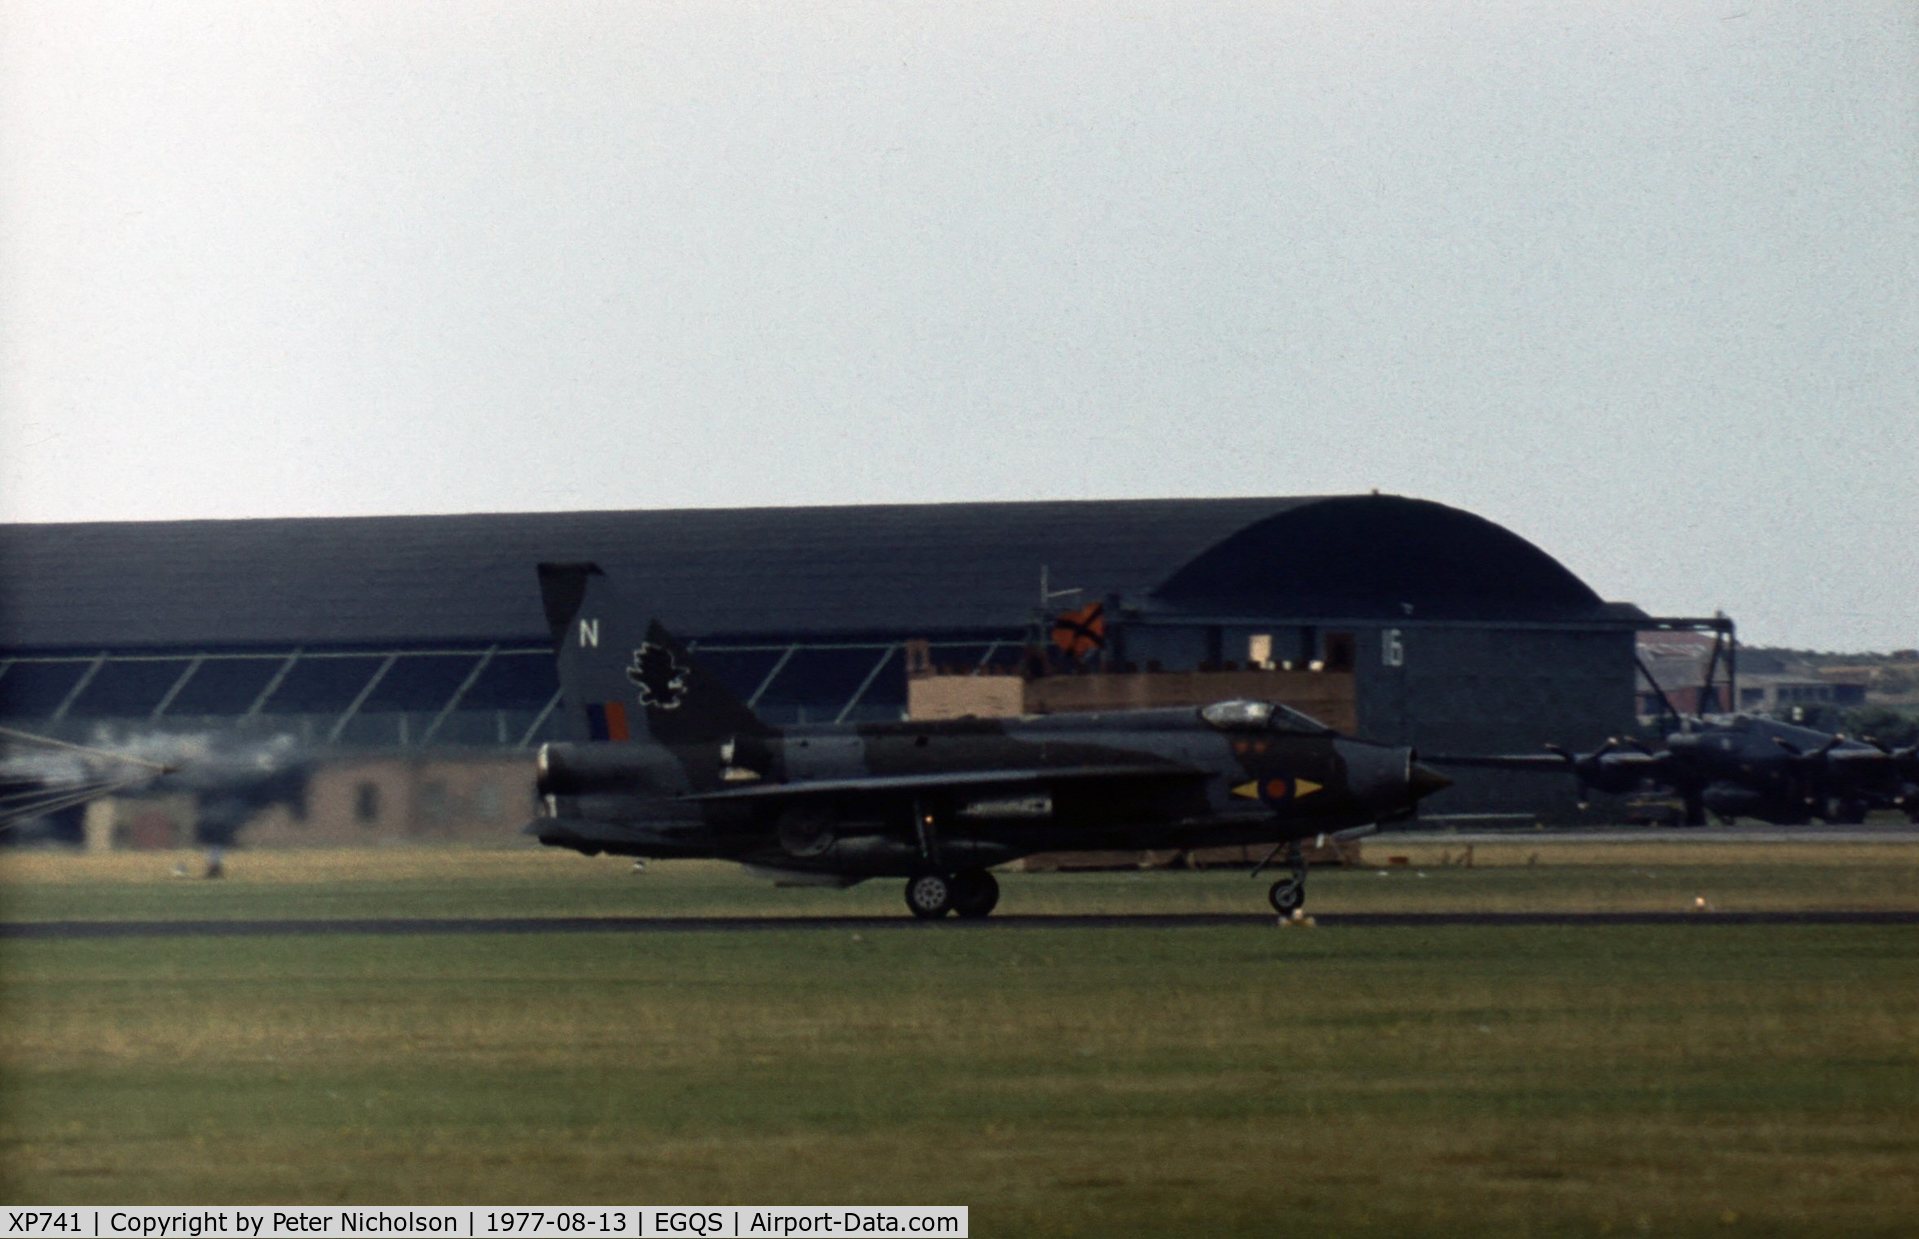 XP741, 1964 English Electric Lightning F.3 C/N 95169, Lightning F.3 of 11 Squadron landing at the 1977 RAF Lossiemouth Open Day.